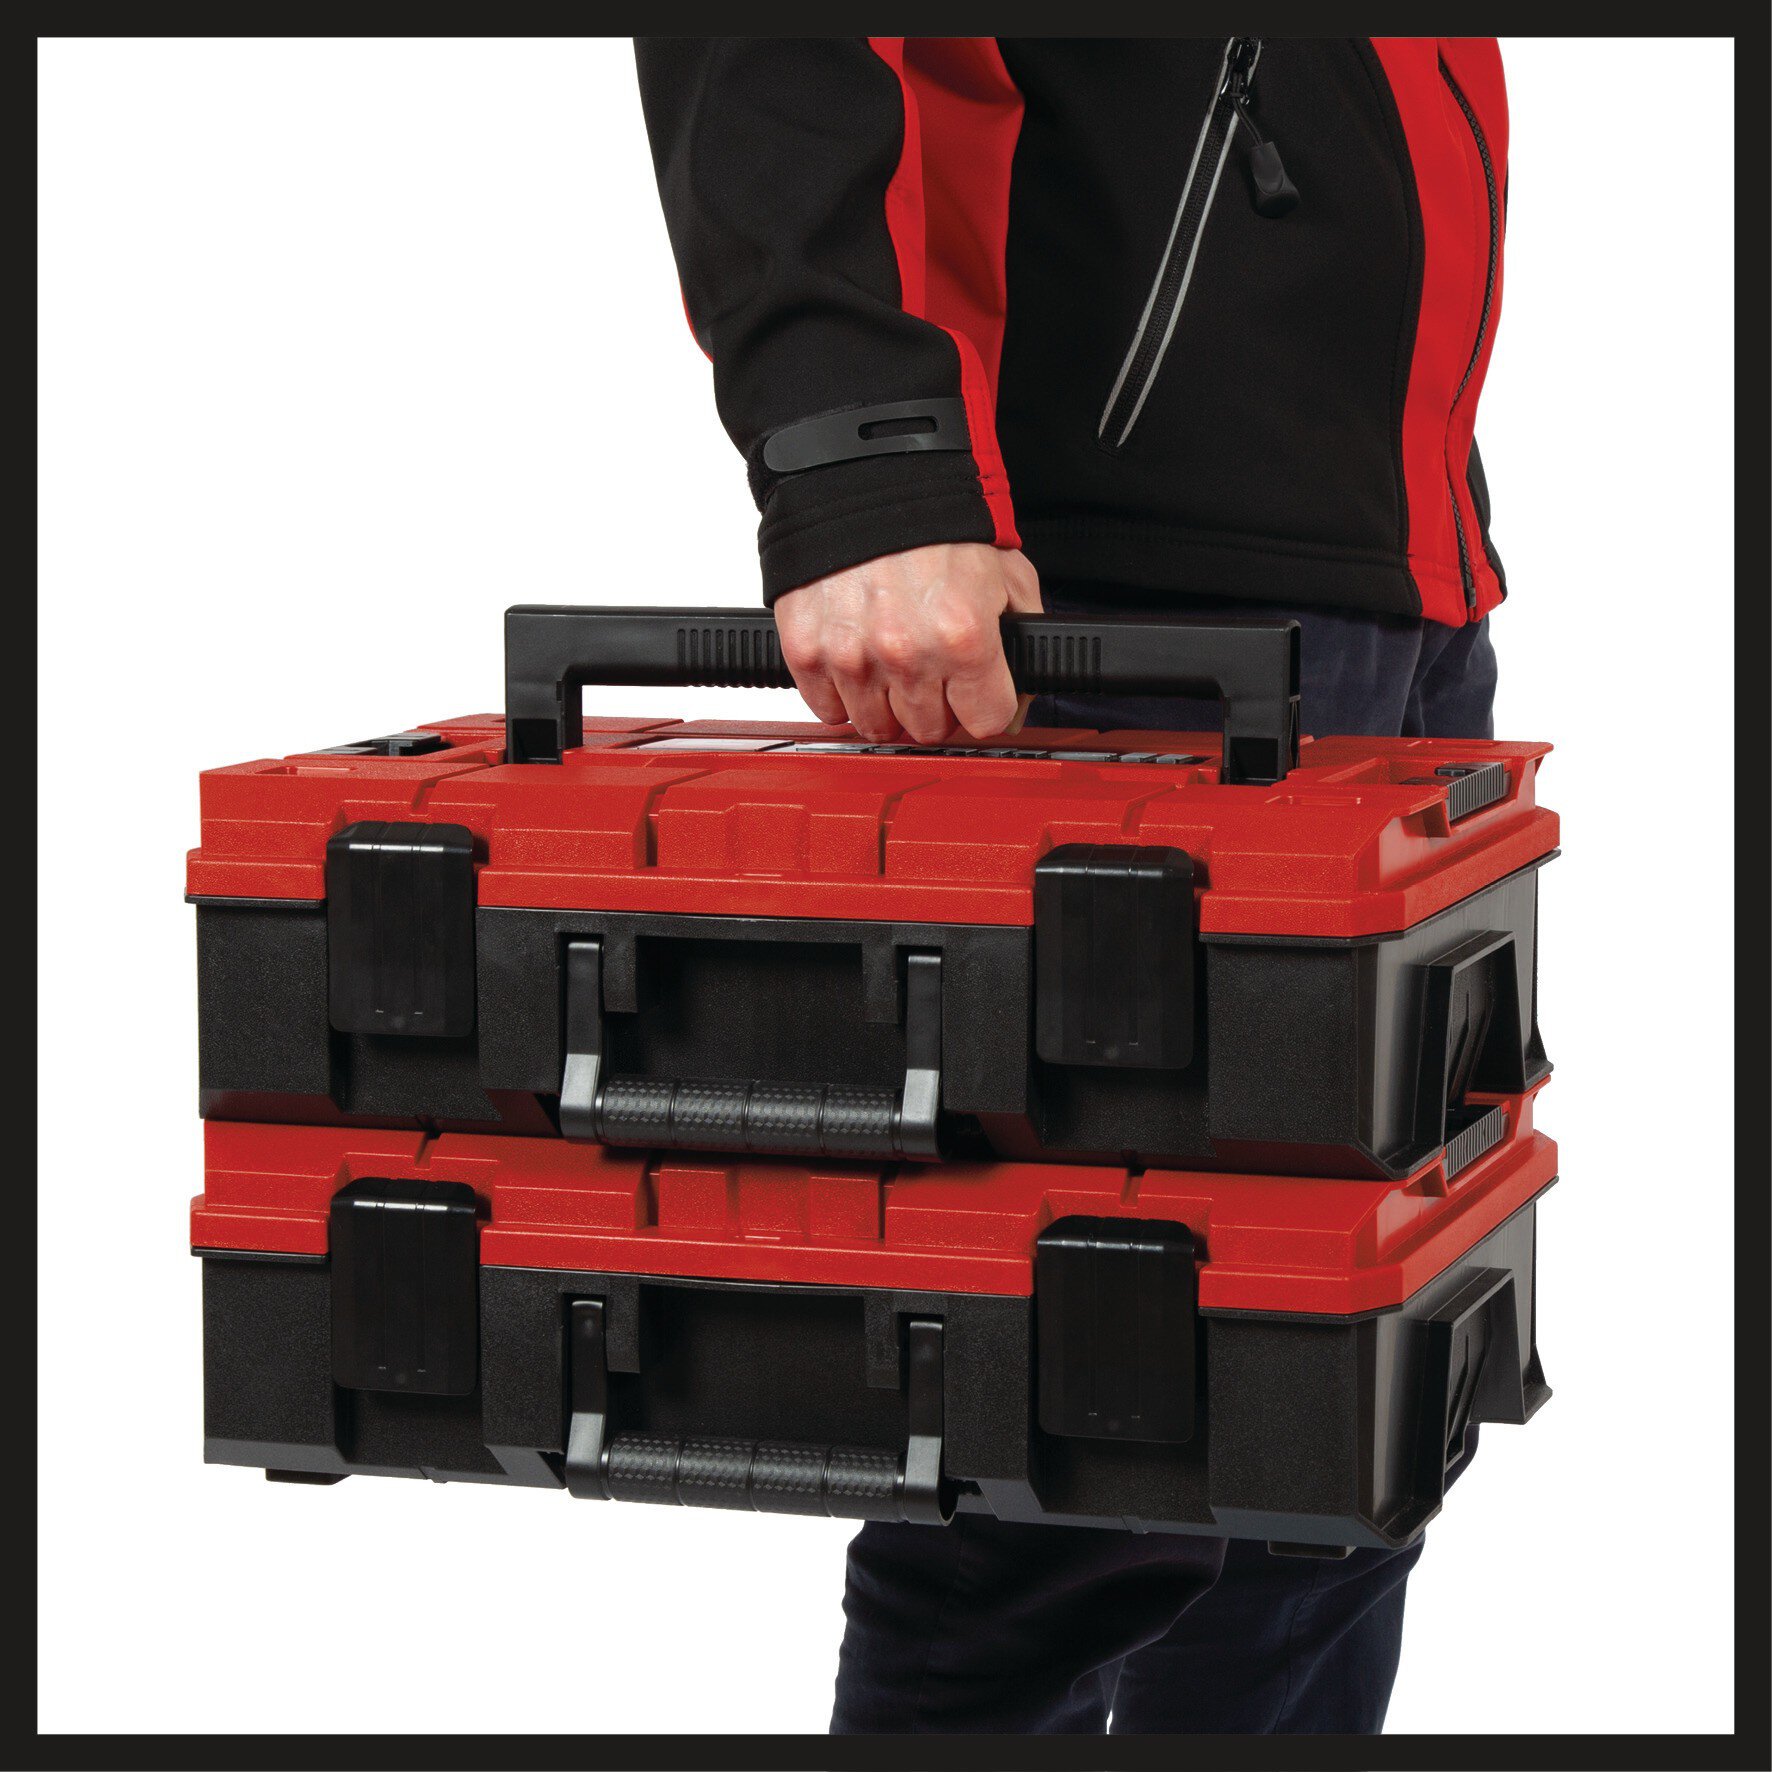 einhell-accessory-system-carrying-case-4540011-detail_image-002